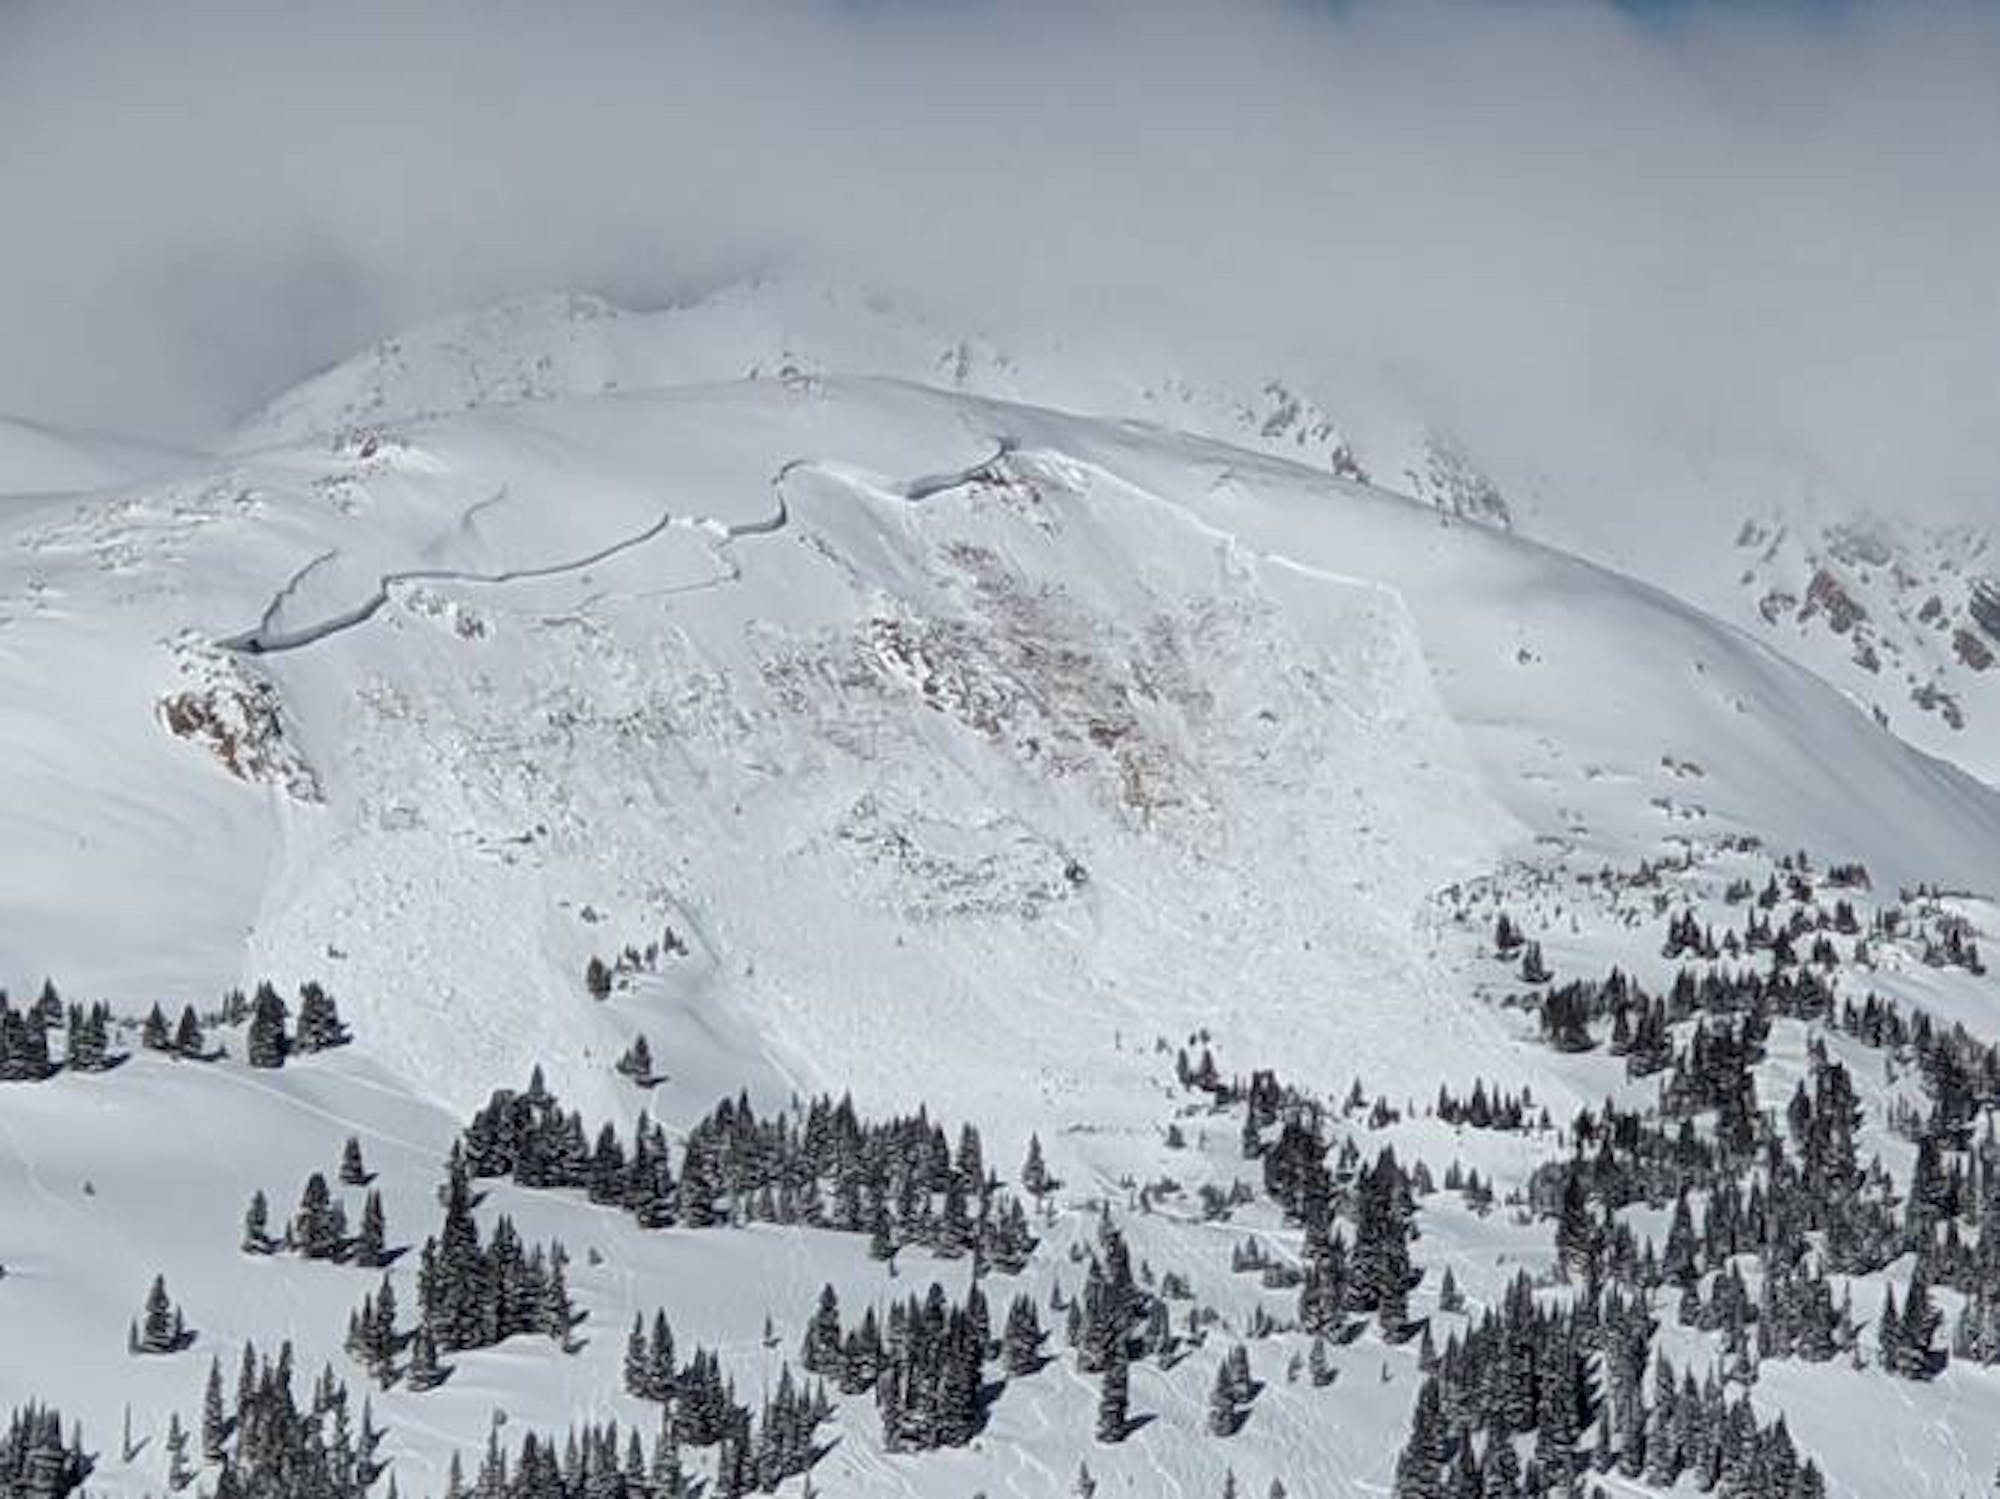 tahoe avalanche: what causes seemingly safe snow slopes to collapse? a physicist and avid skier explains